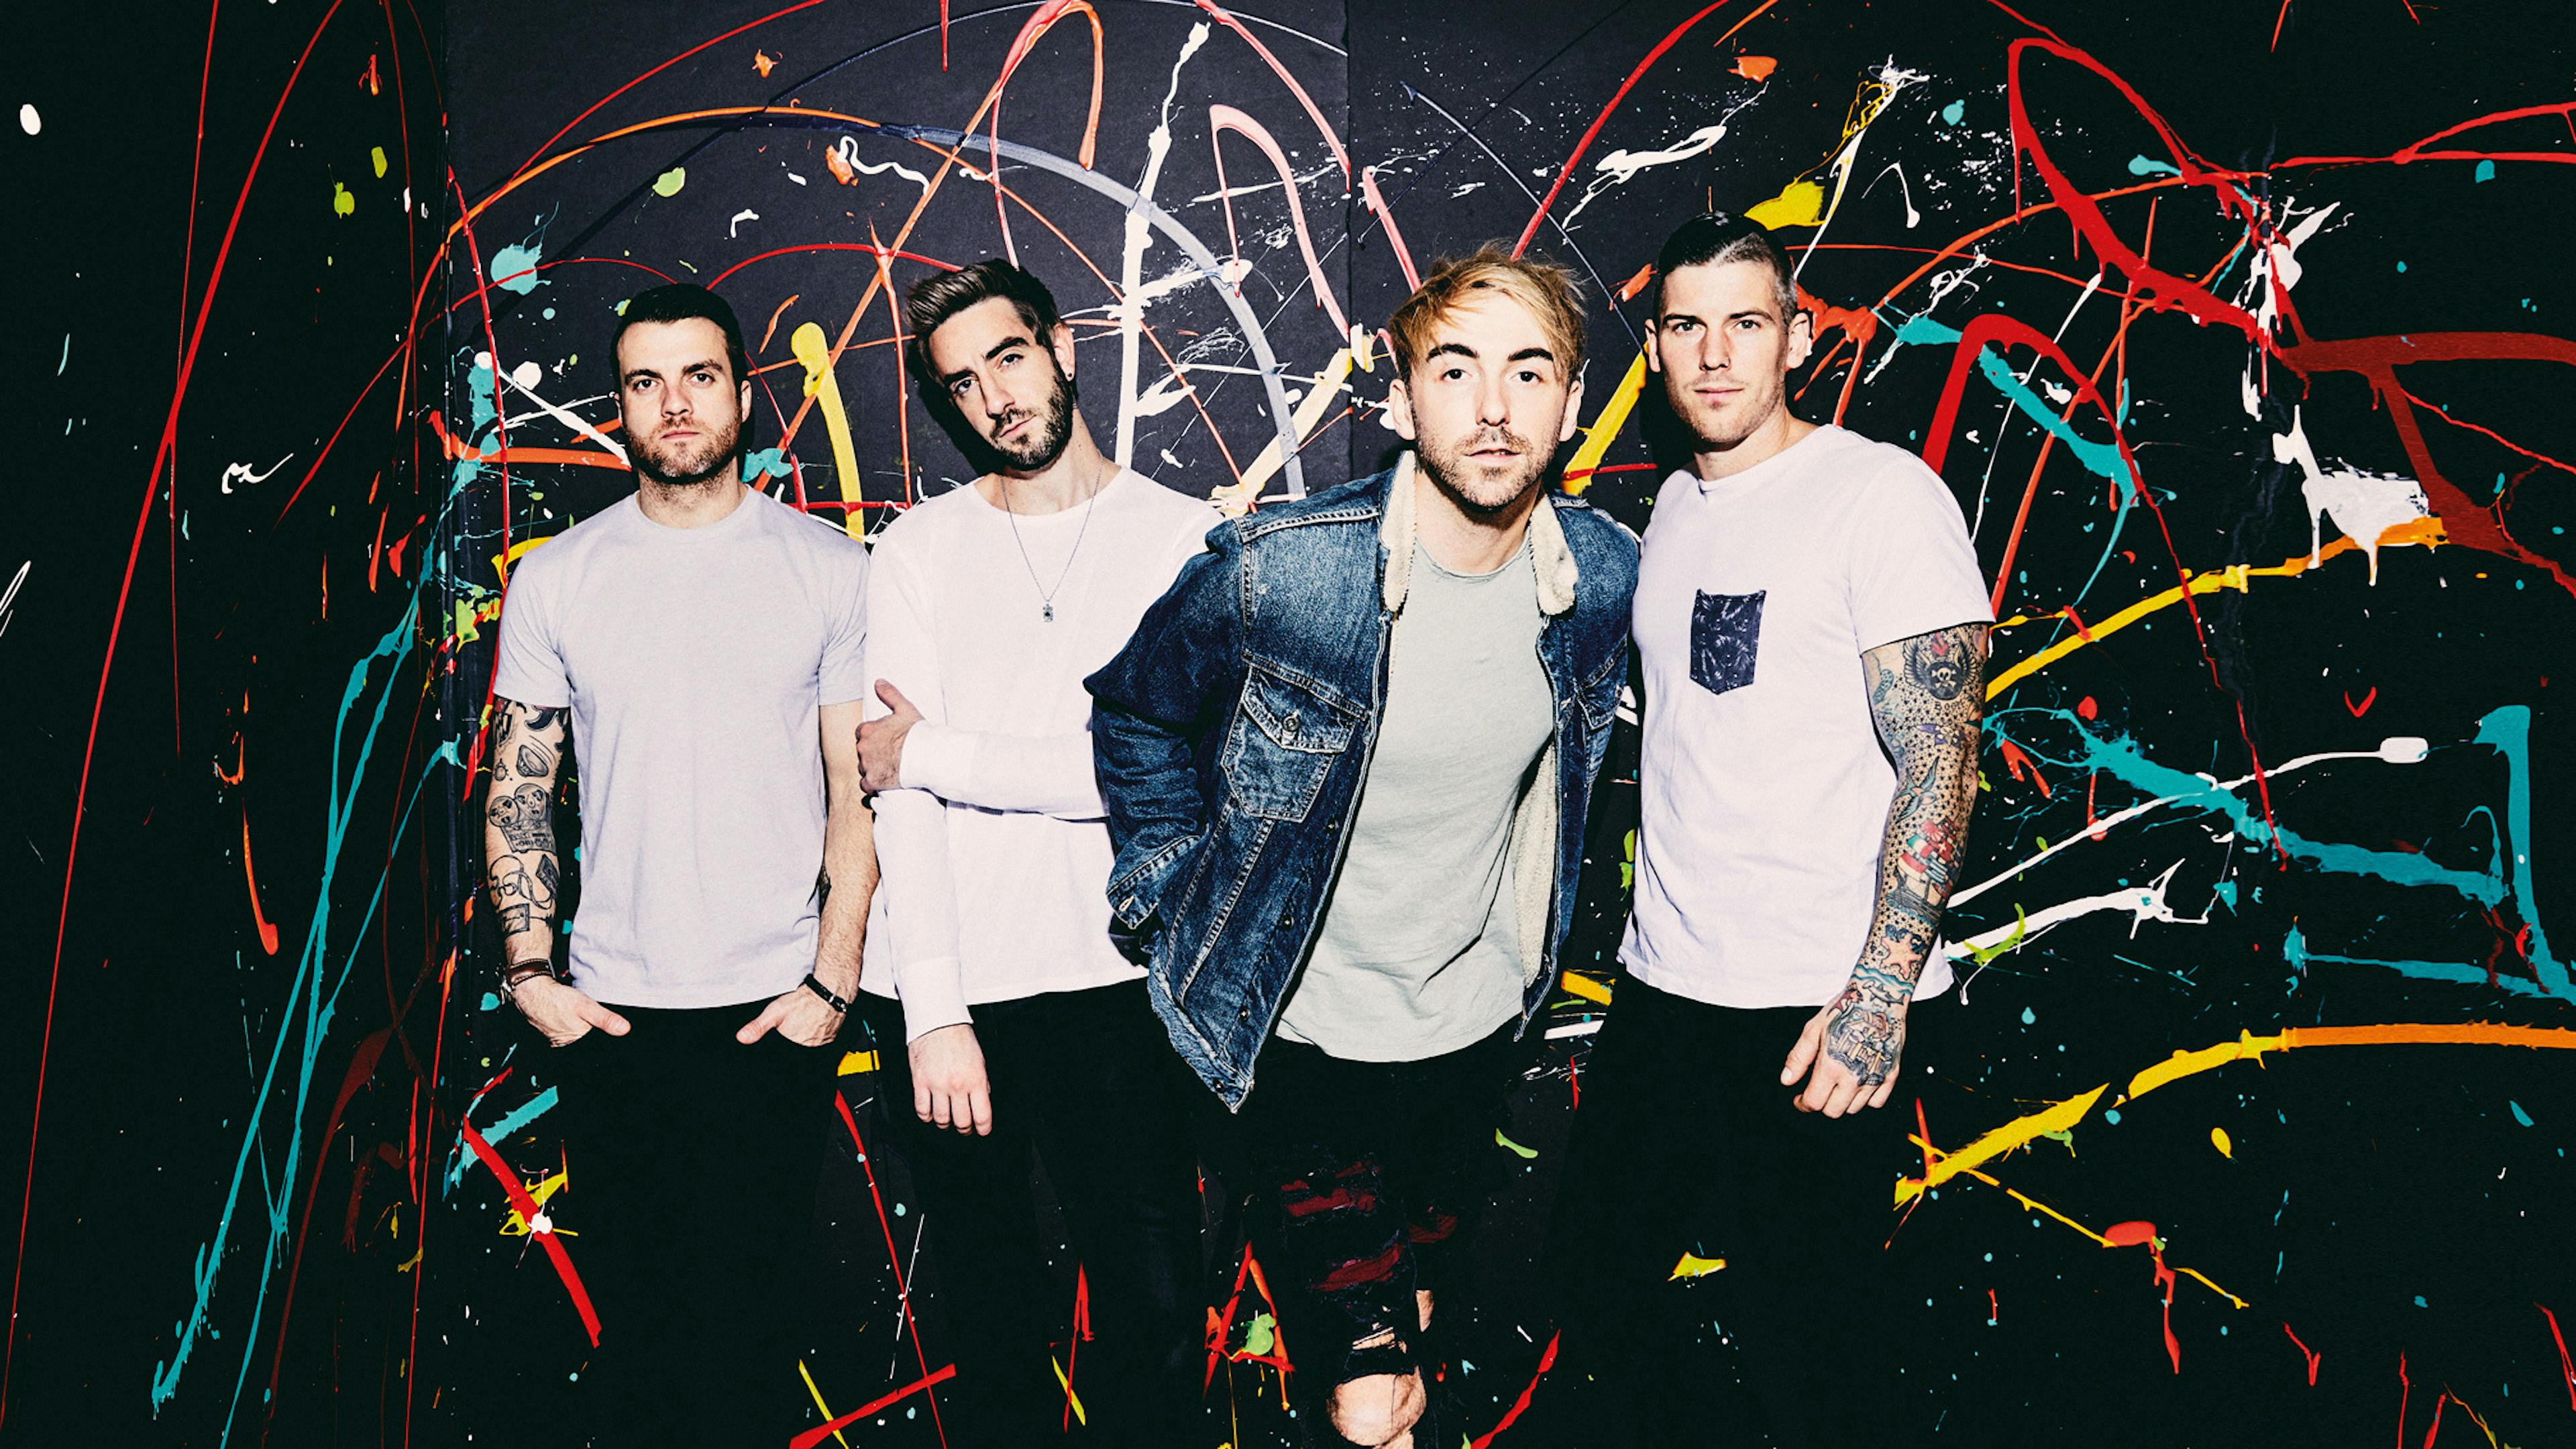 Alex Gaskarth On The Title Of All Time Low's New Album, Wake Up, Sunshine